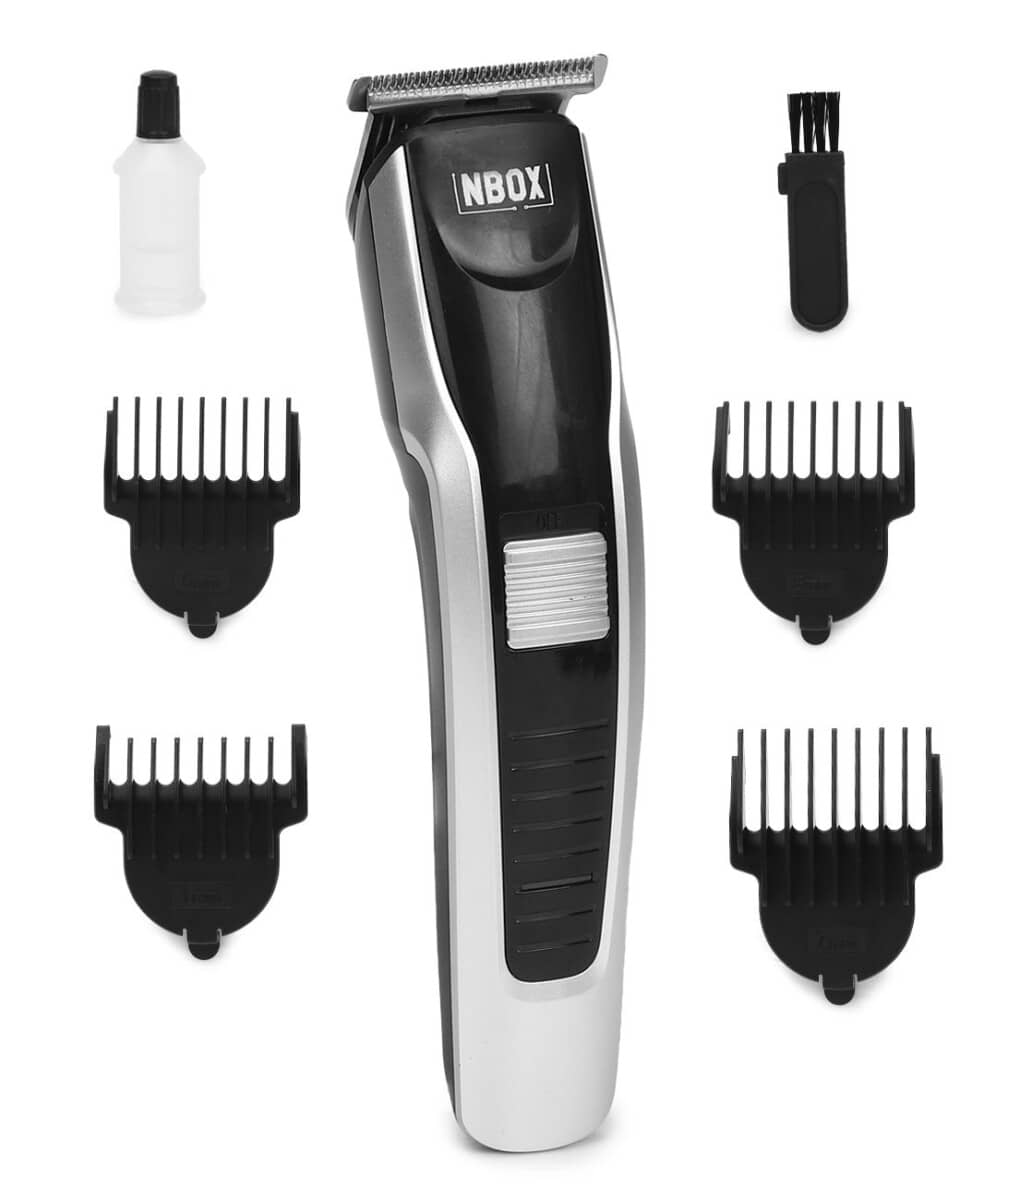 Professional Automatic Rechargeable Pet Hair Trimmer for Dogs PetTrimmer  Pet Hair Trimmer with LCD Display and Turbo Mode for Dog and Cat Cordless  and Rechargeable Trimmer  24x7 eMall